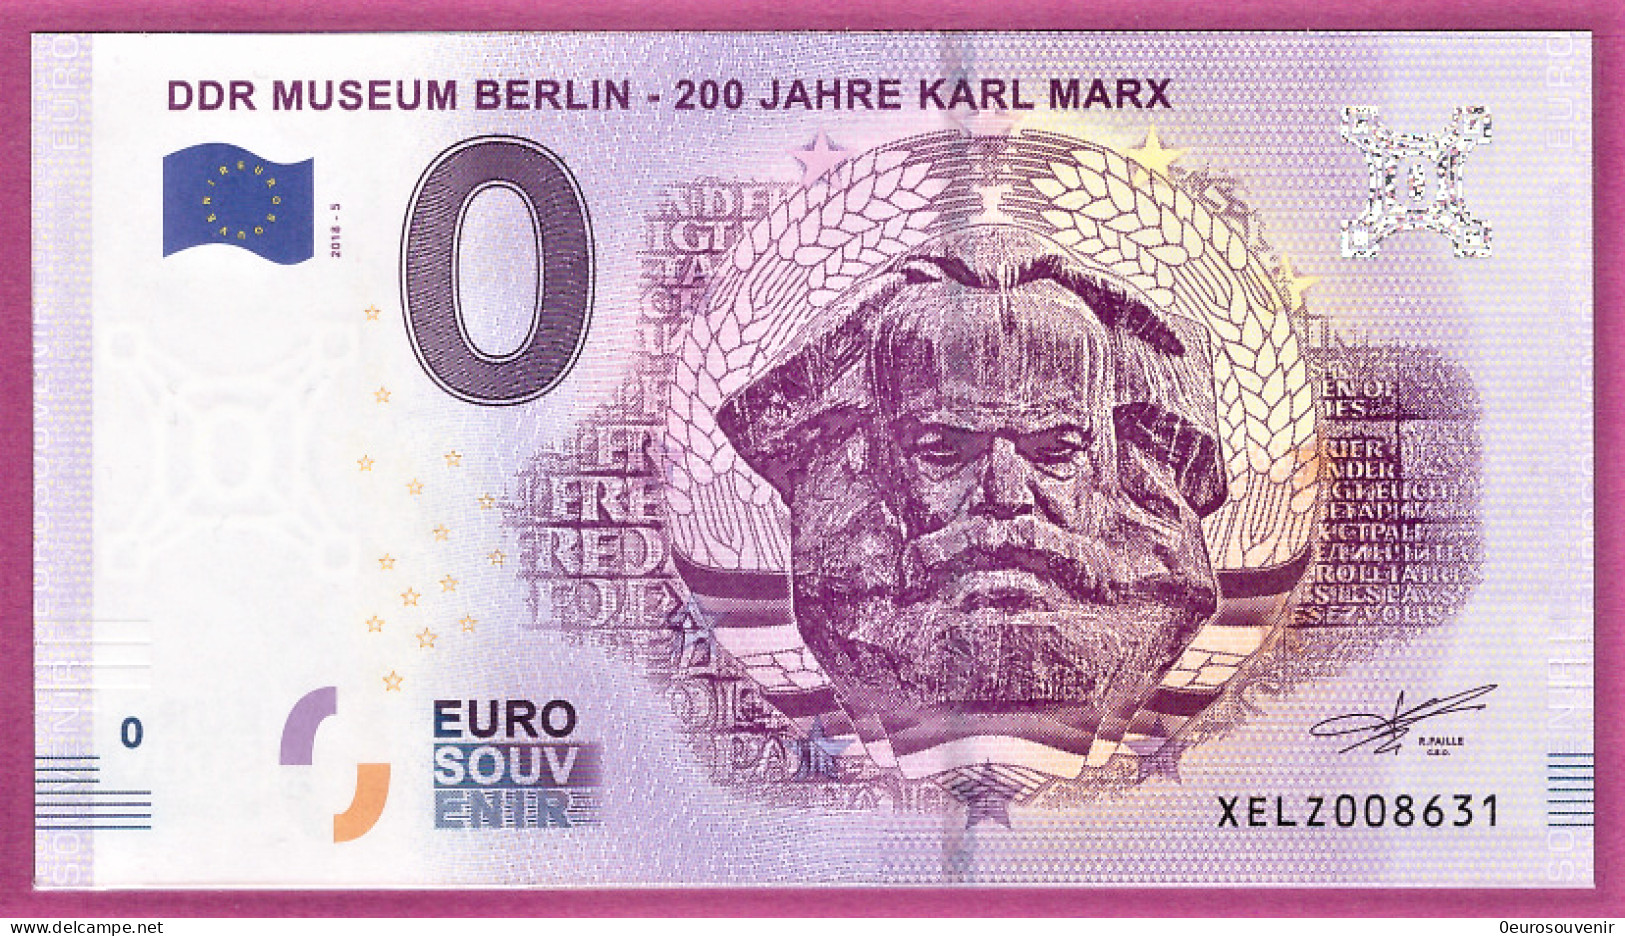 0-Euro XELZ 2018-5 DDR MUSEUM BERLIN - 200 JAHRE KARL MARX - Private Proofs / Unofficial